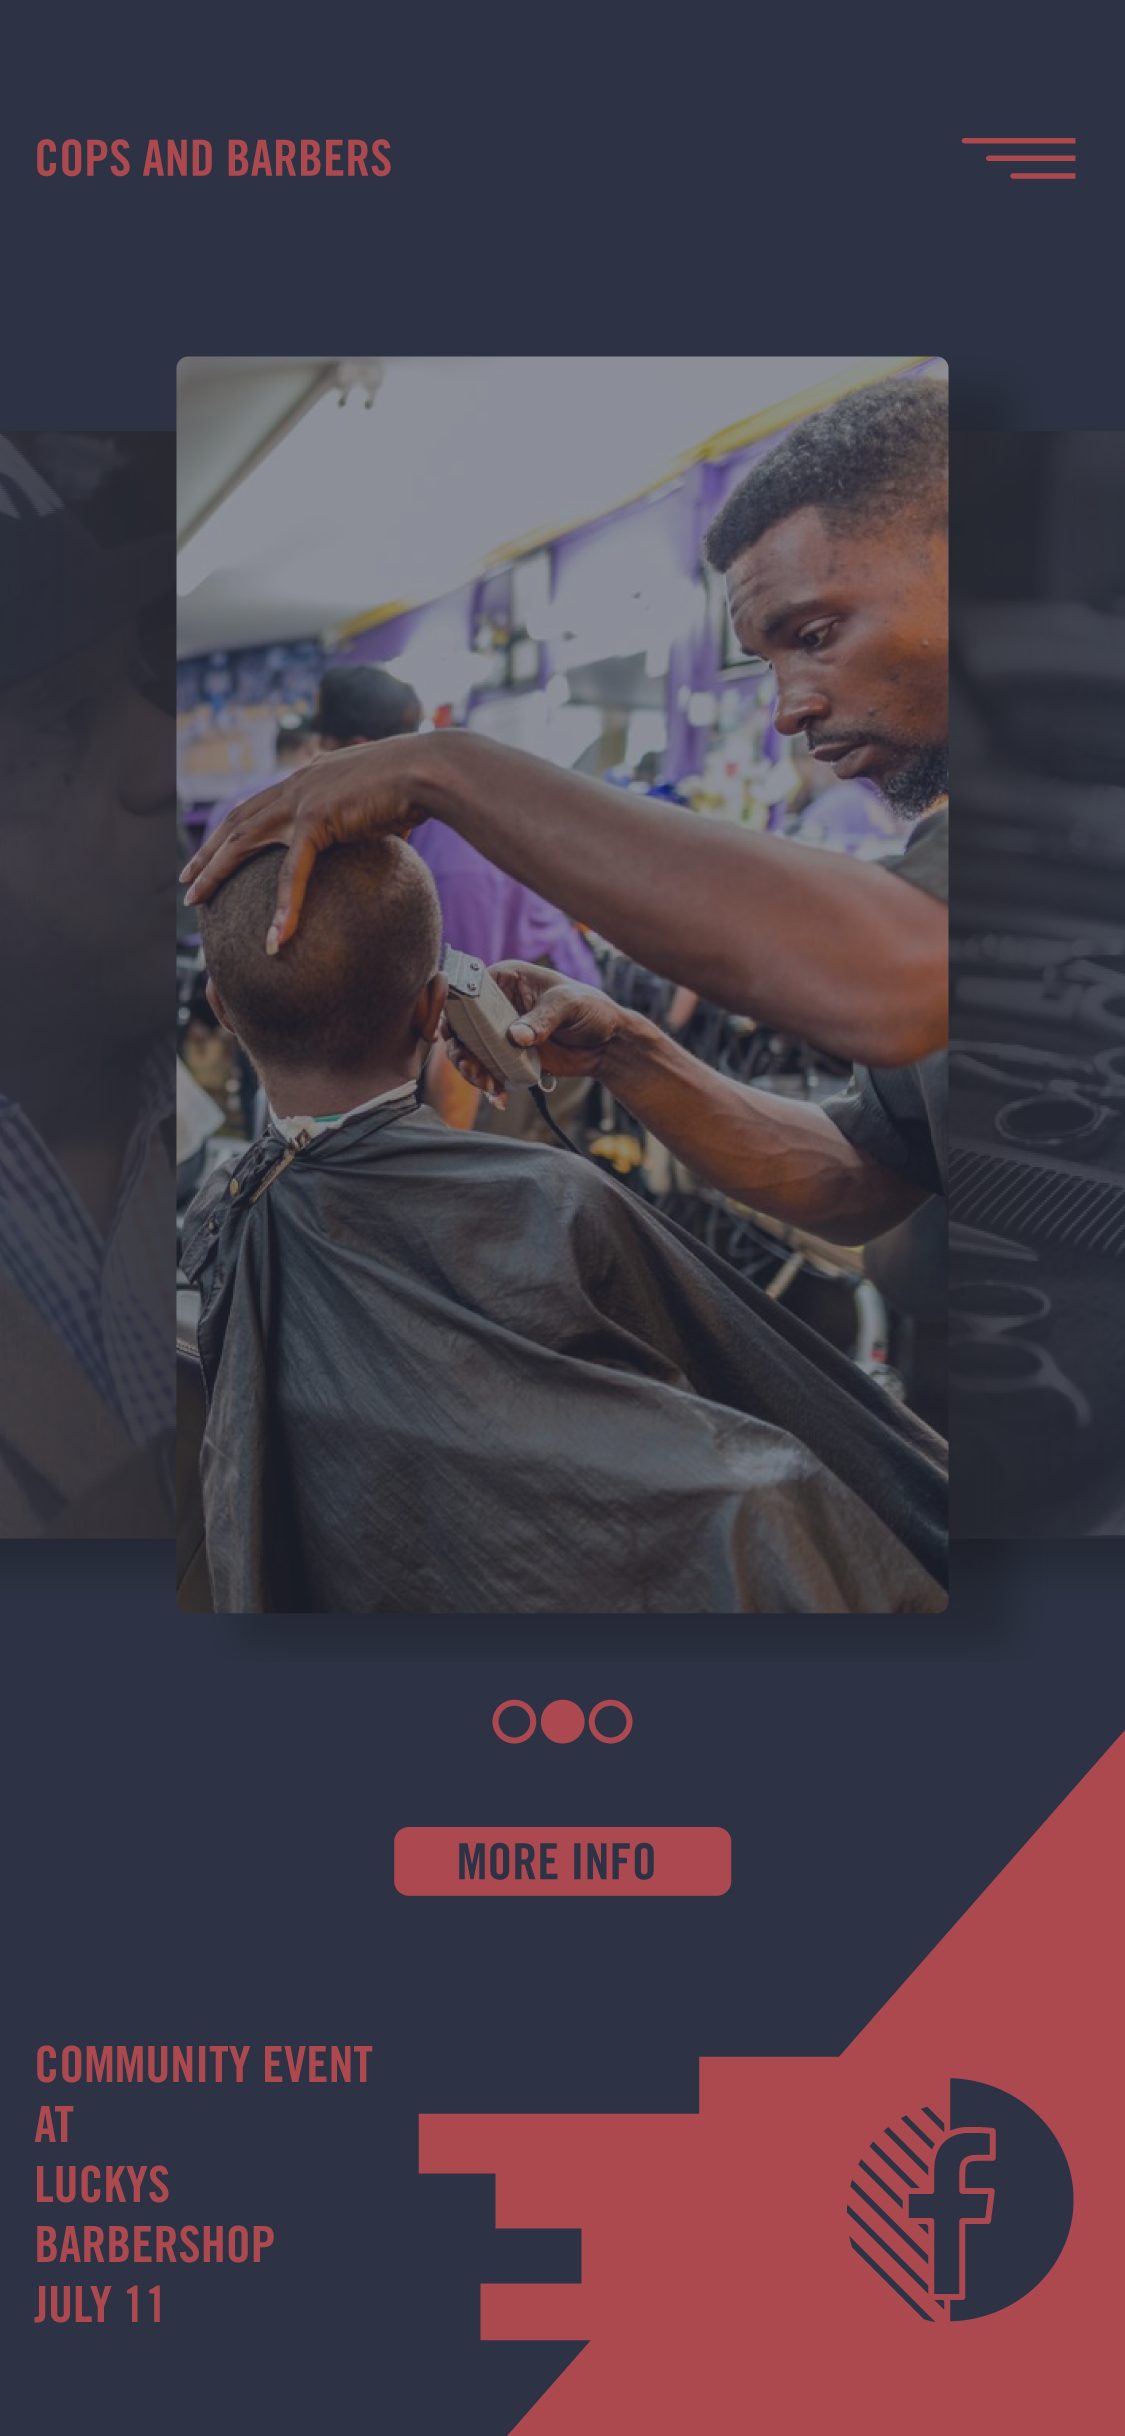 cops and barbers mobile application design